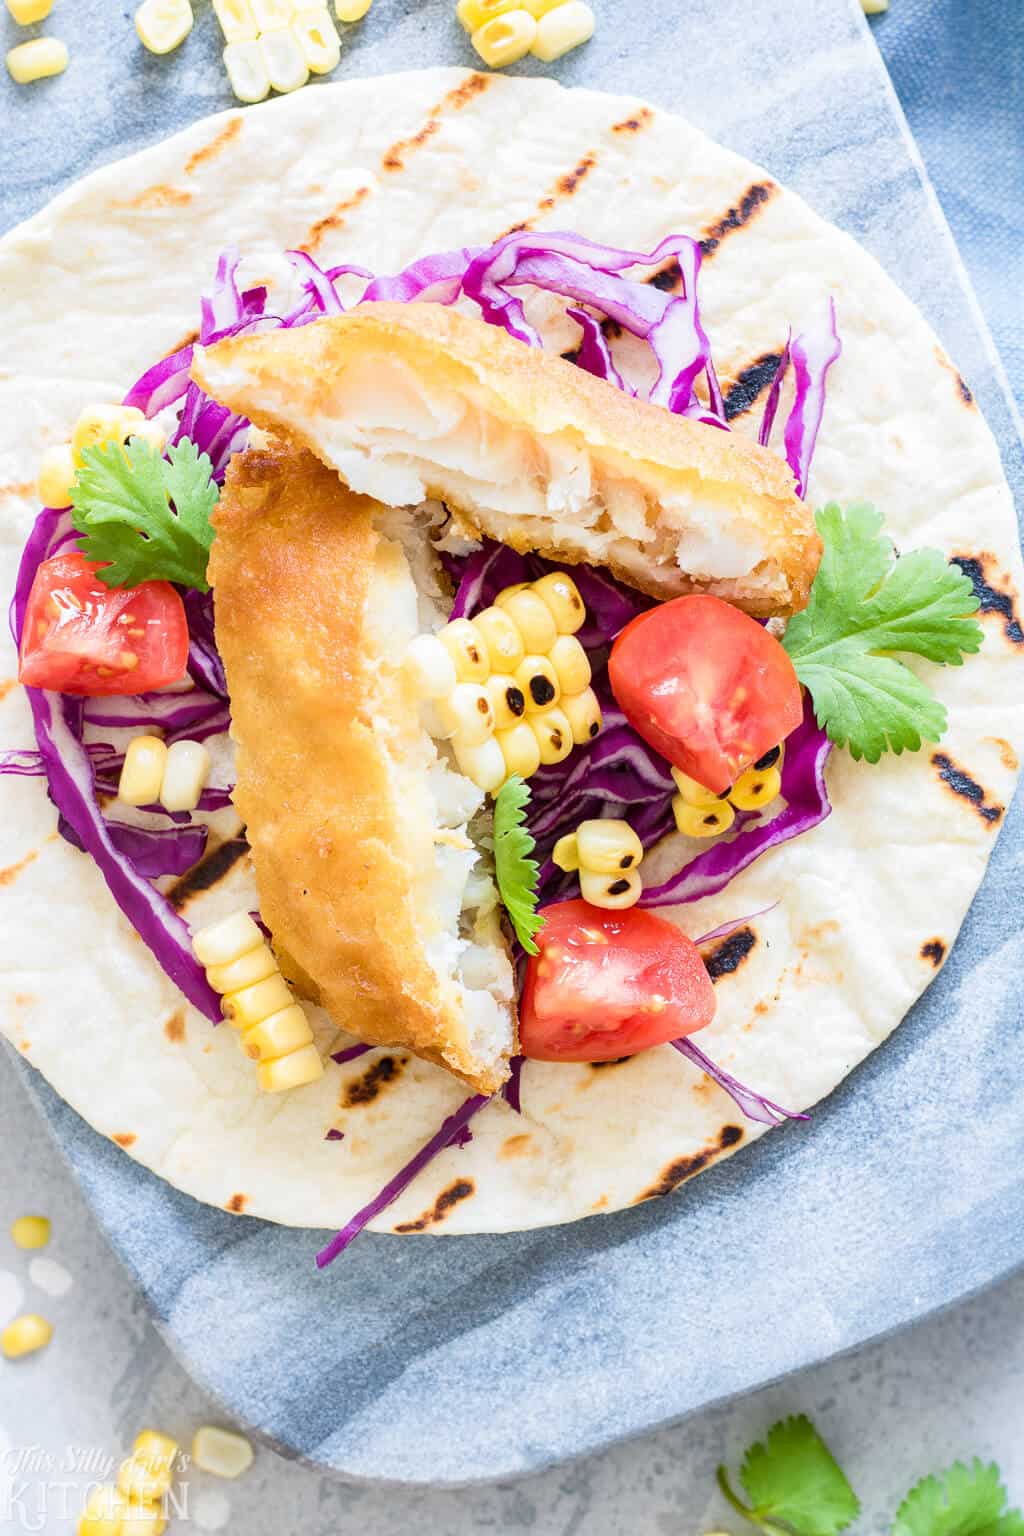 Easy Fish Tacos with Creamy Chimichurri Sauce, an easy weeknight meal you will make again and again! #Recipe from ThisSillyGirlsKitchen.com #fishtaco #taco #chimichurri